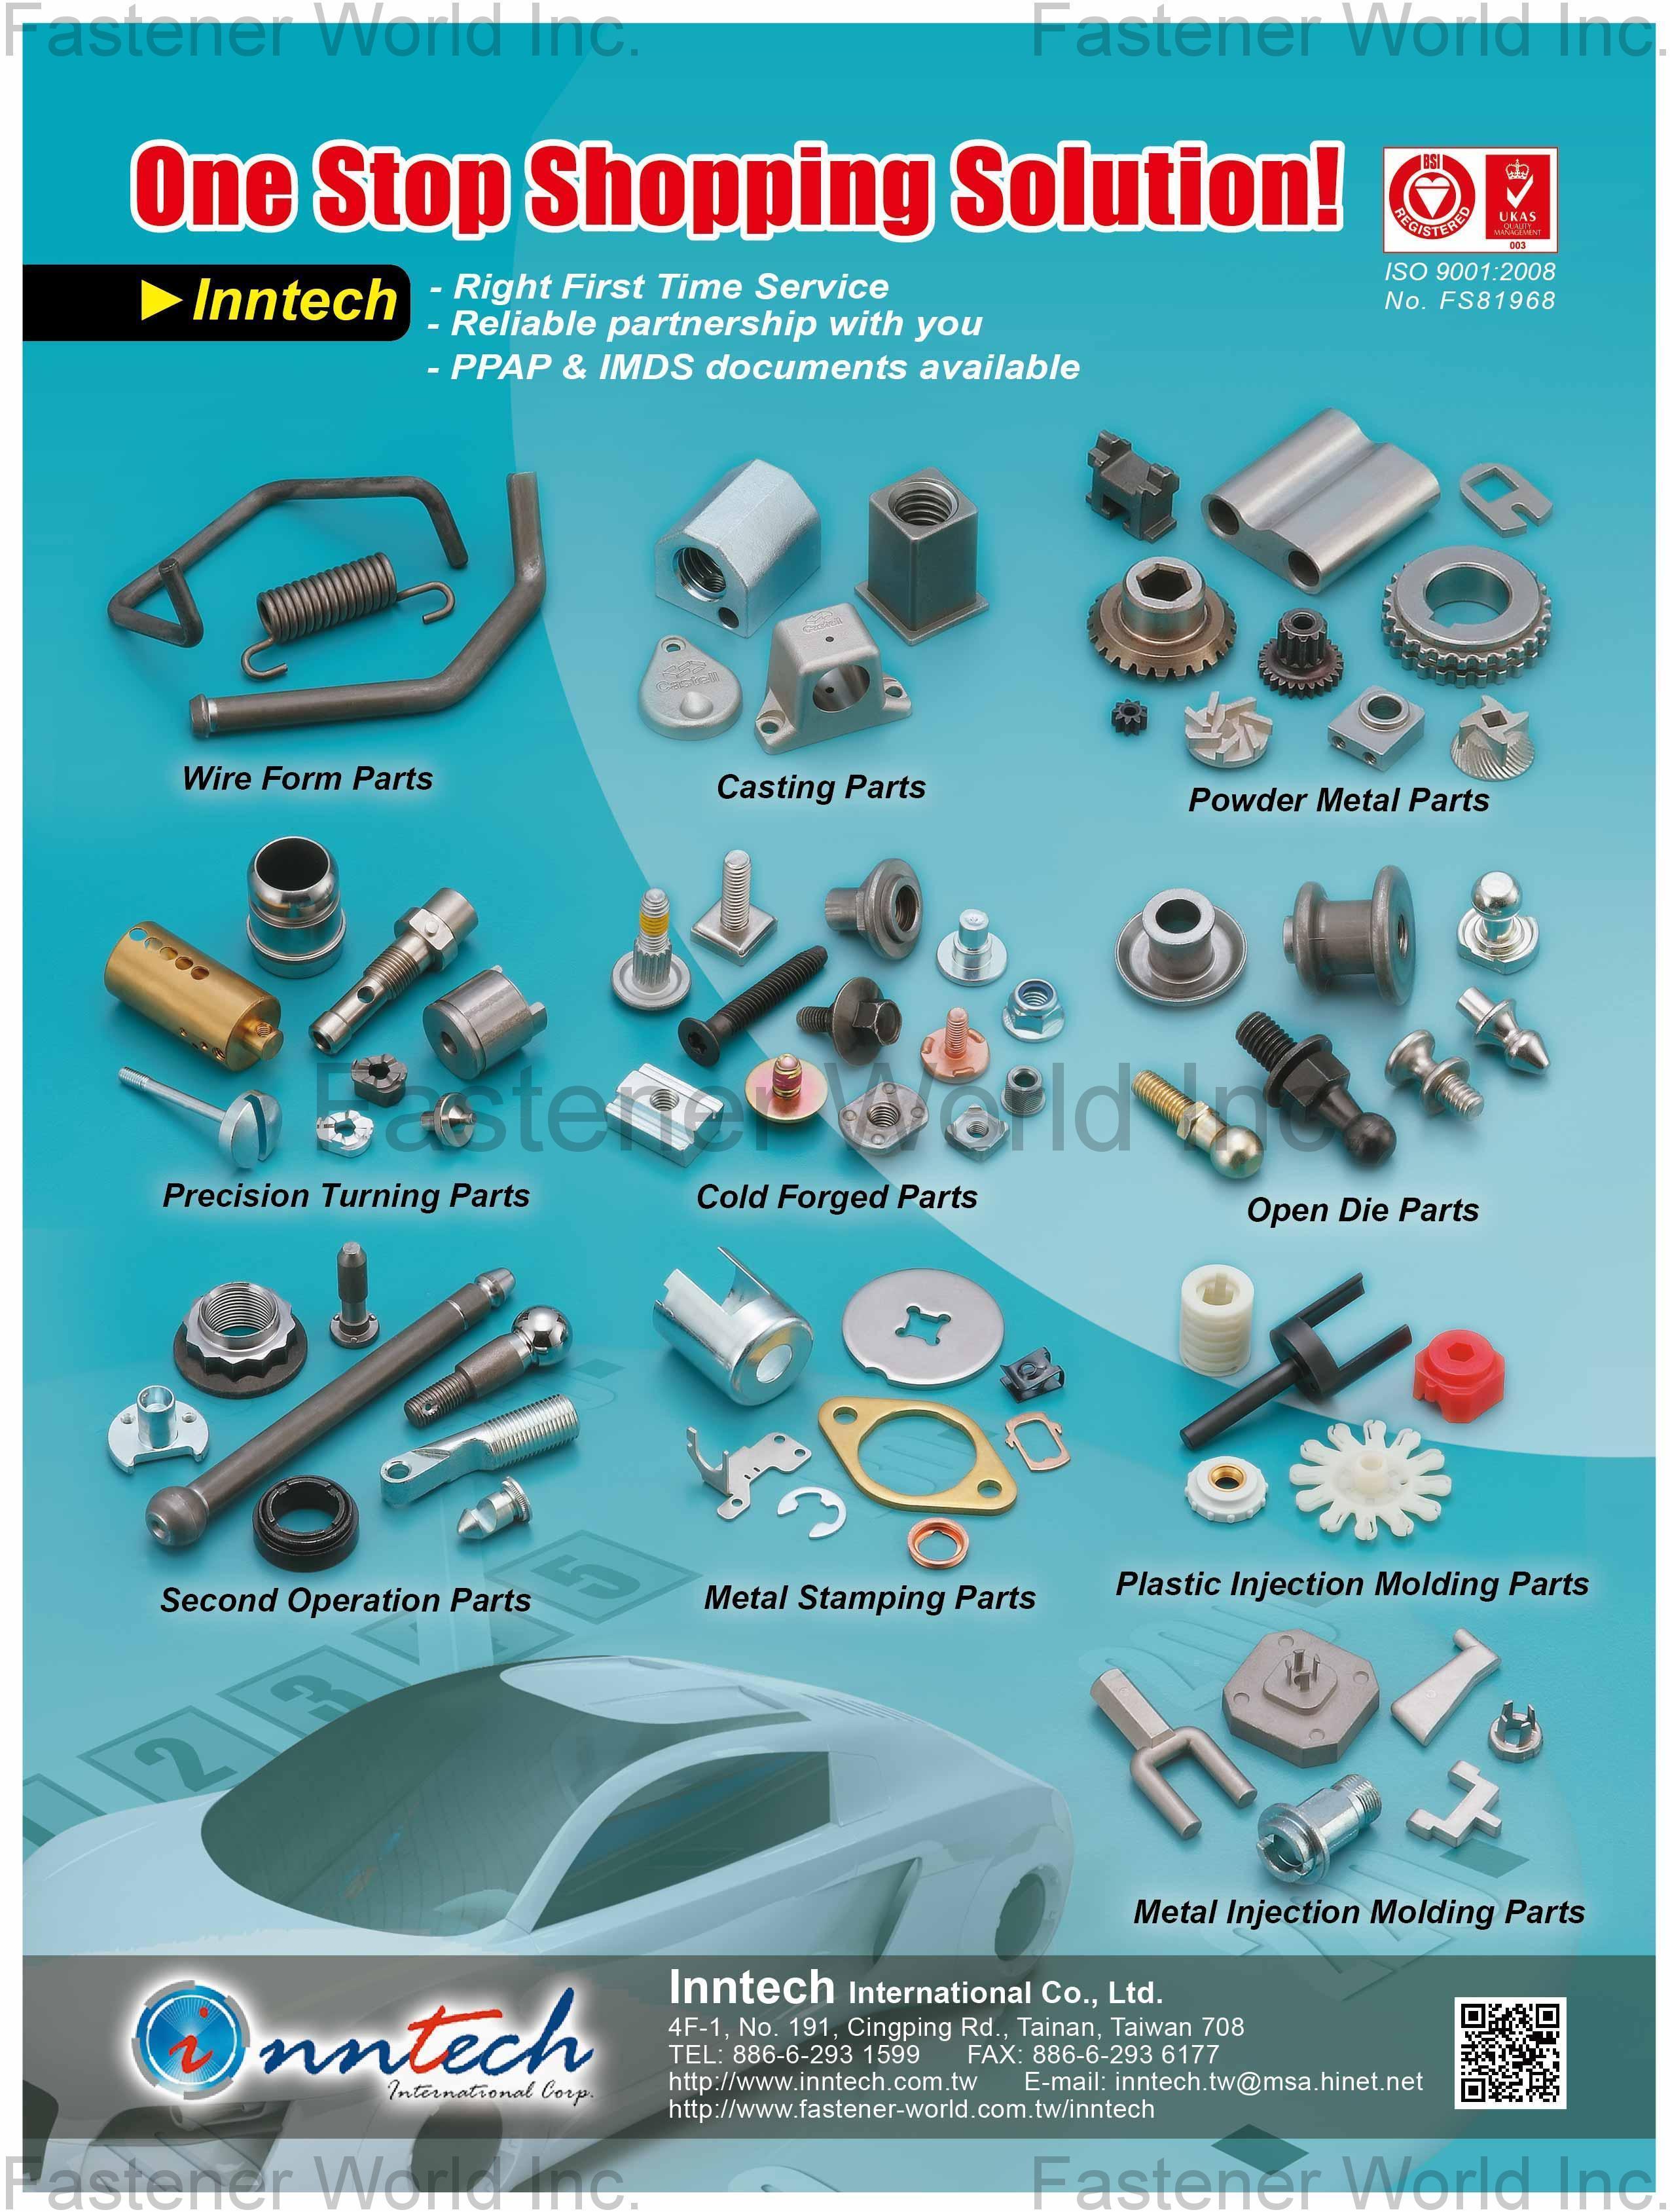 INNTECH INTERNATIONAL CO., LTD.  , Wire Form Parts, Casting Parts, Powder Metal Parts, Open Die Parts, Cold Forged Parts, Precision Turning Parts, Second Operation Parts, Metal Stamping Parts, Plastic Injection Molding Parts, Metal Injection Molding Parts,  , Cnc Machining Parts